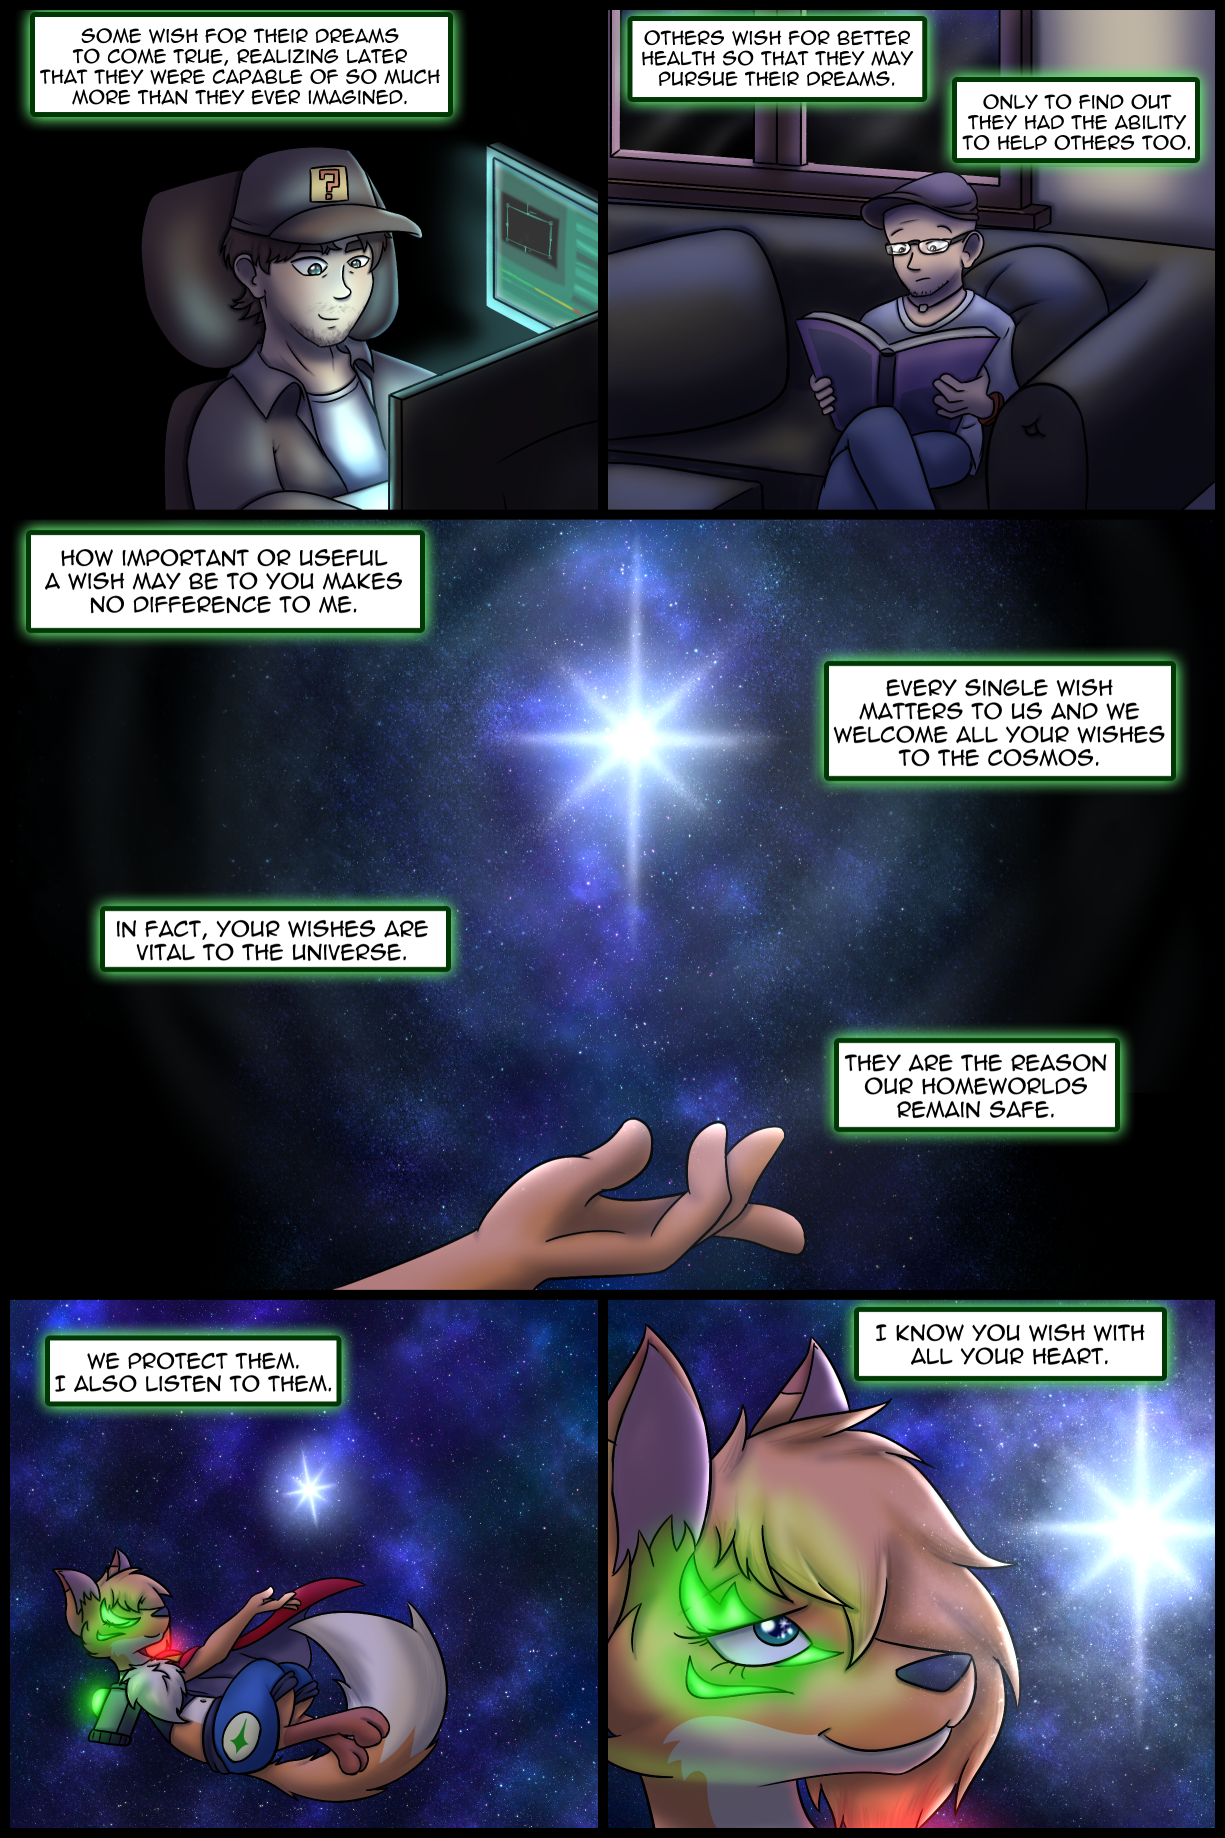 Ch0 Remastered Page 3-4 – The Value of Wishes – Nurturing Wishes